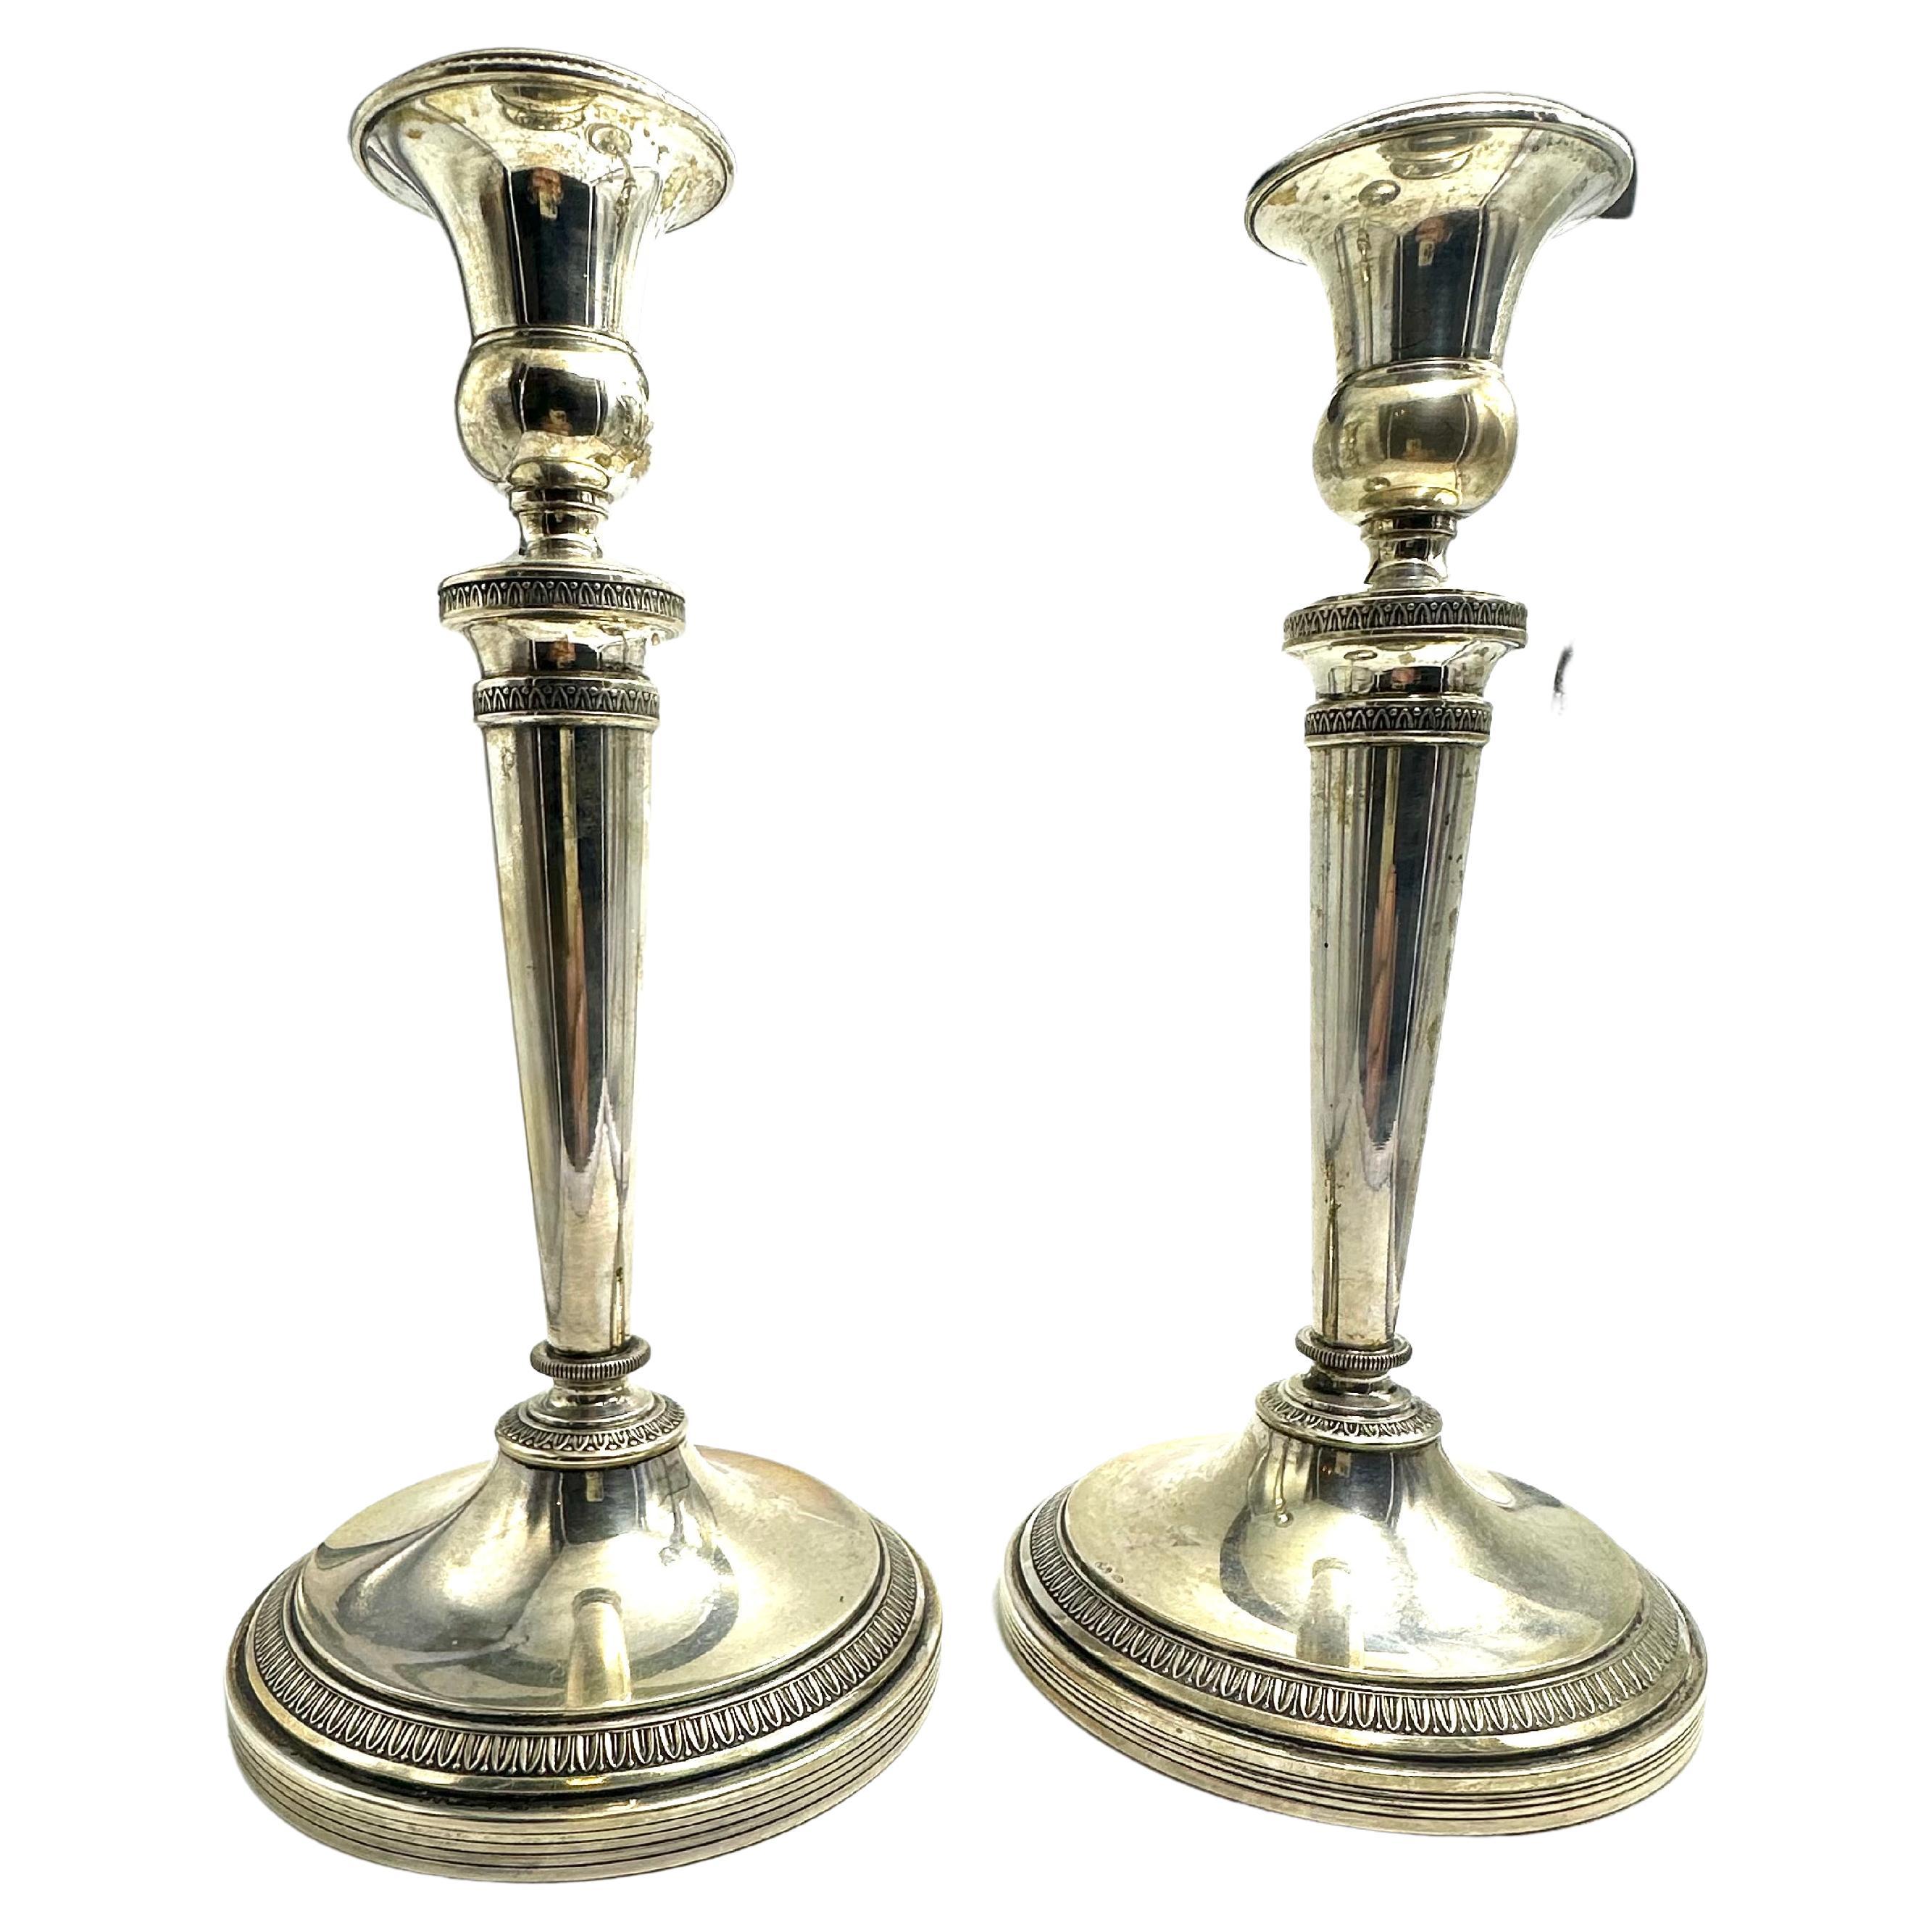 Elegant pair of 800-thousandth silver candlesticks.
Made by the historic firm PETRUZZI ANTONIO & BRANCA UGO of Brescia, Italy, in the 1940s.
Fine workmanship in the Empire style, they are in excellent condition.
Height 24 cm, base diameter 11 cm